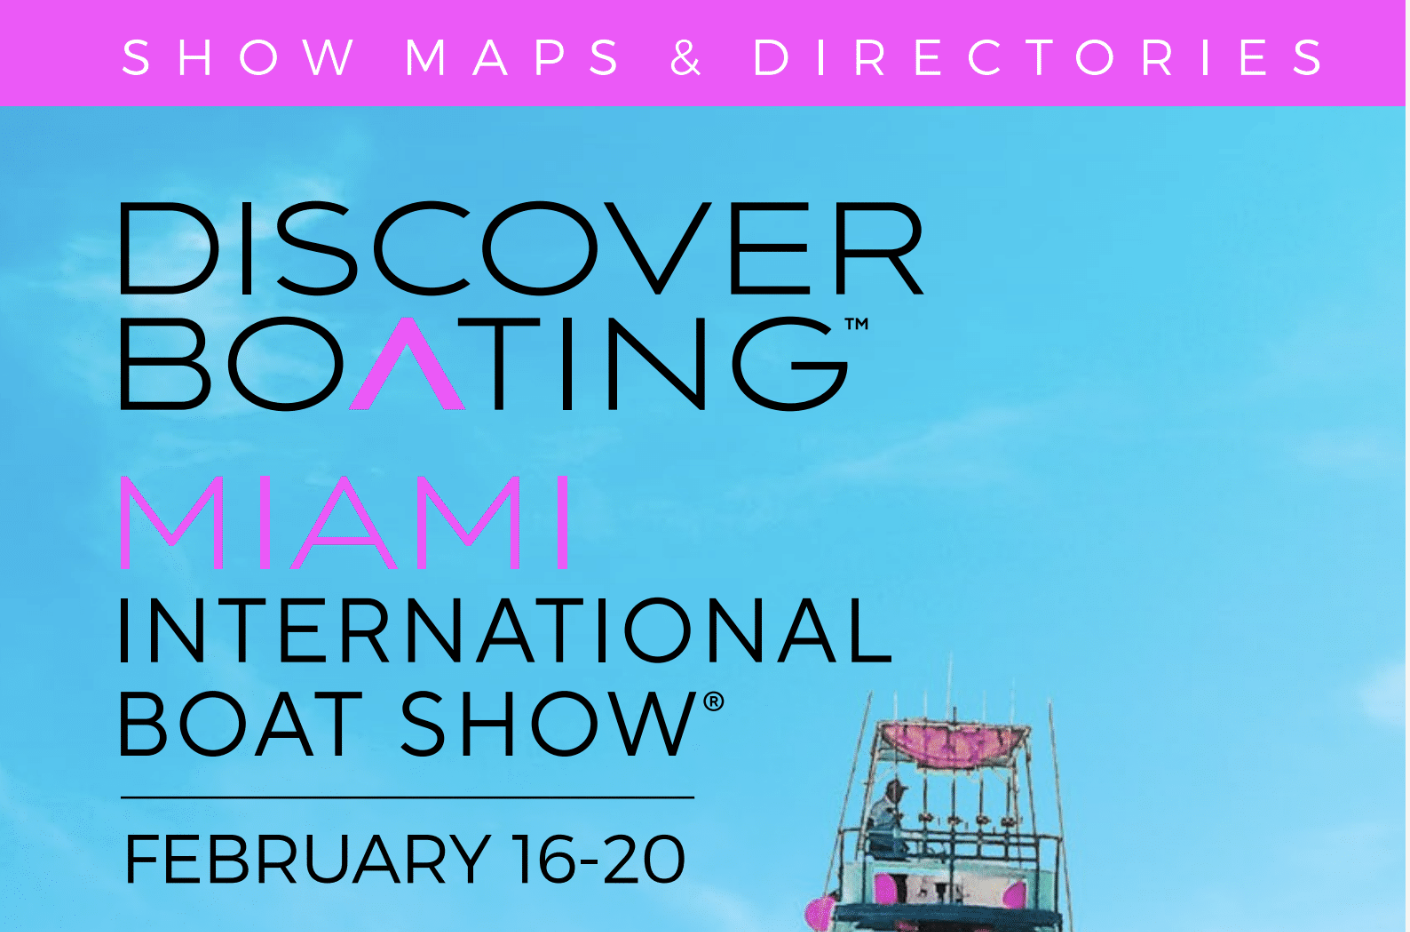 What's New At The 2022 Discover Boating Miami International Boat Show